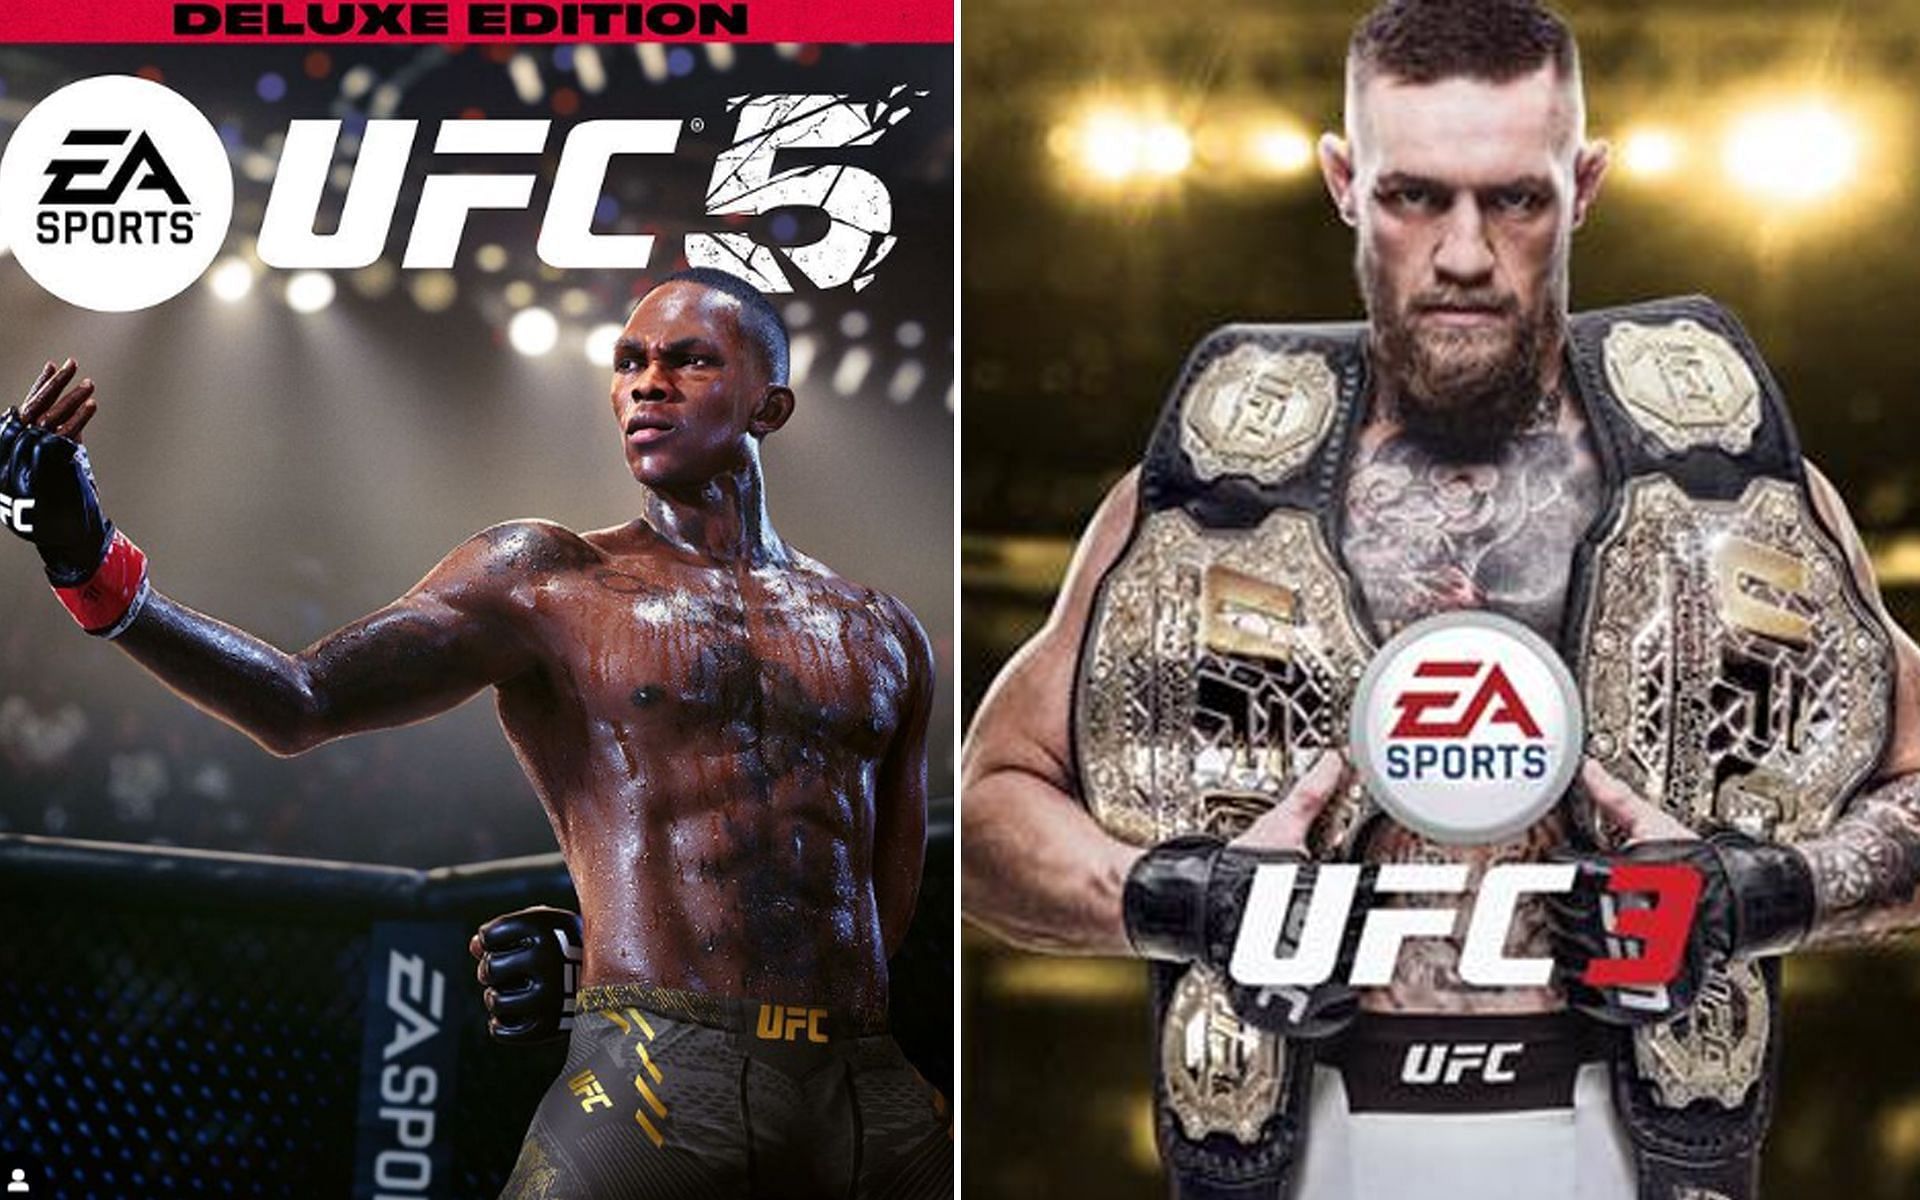 EA Sports UFC 5 cover [L] and UFC 3 cover [R] [Images via @easportsufc Instagram and EA Sports UFC 3 Wikipedia]